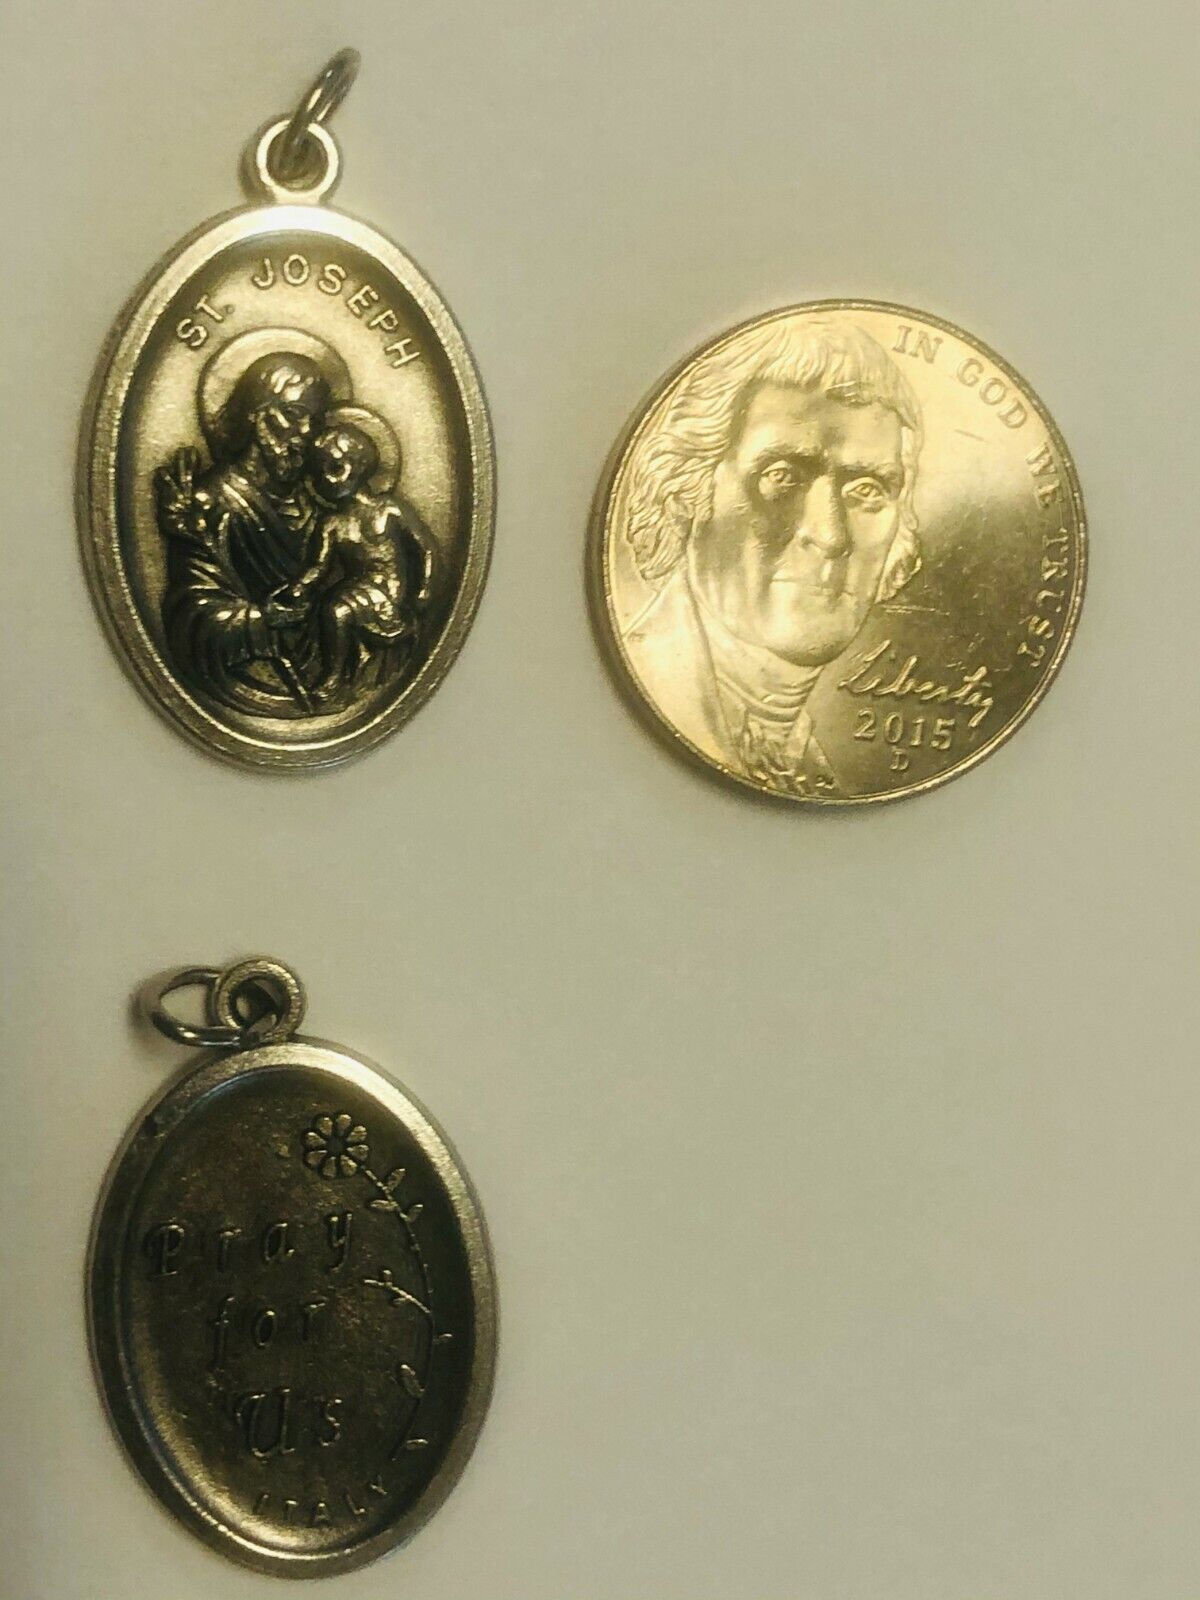 Saint Joseph with Child Jesus Medal, New from Italy